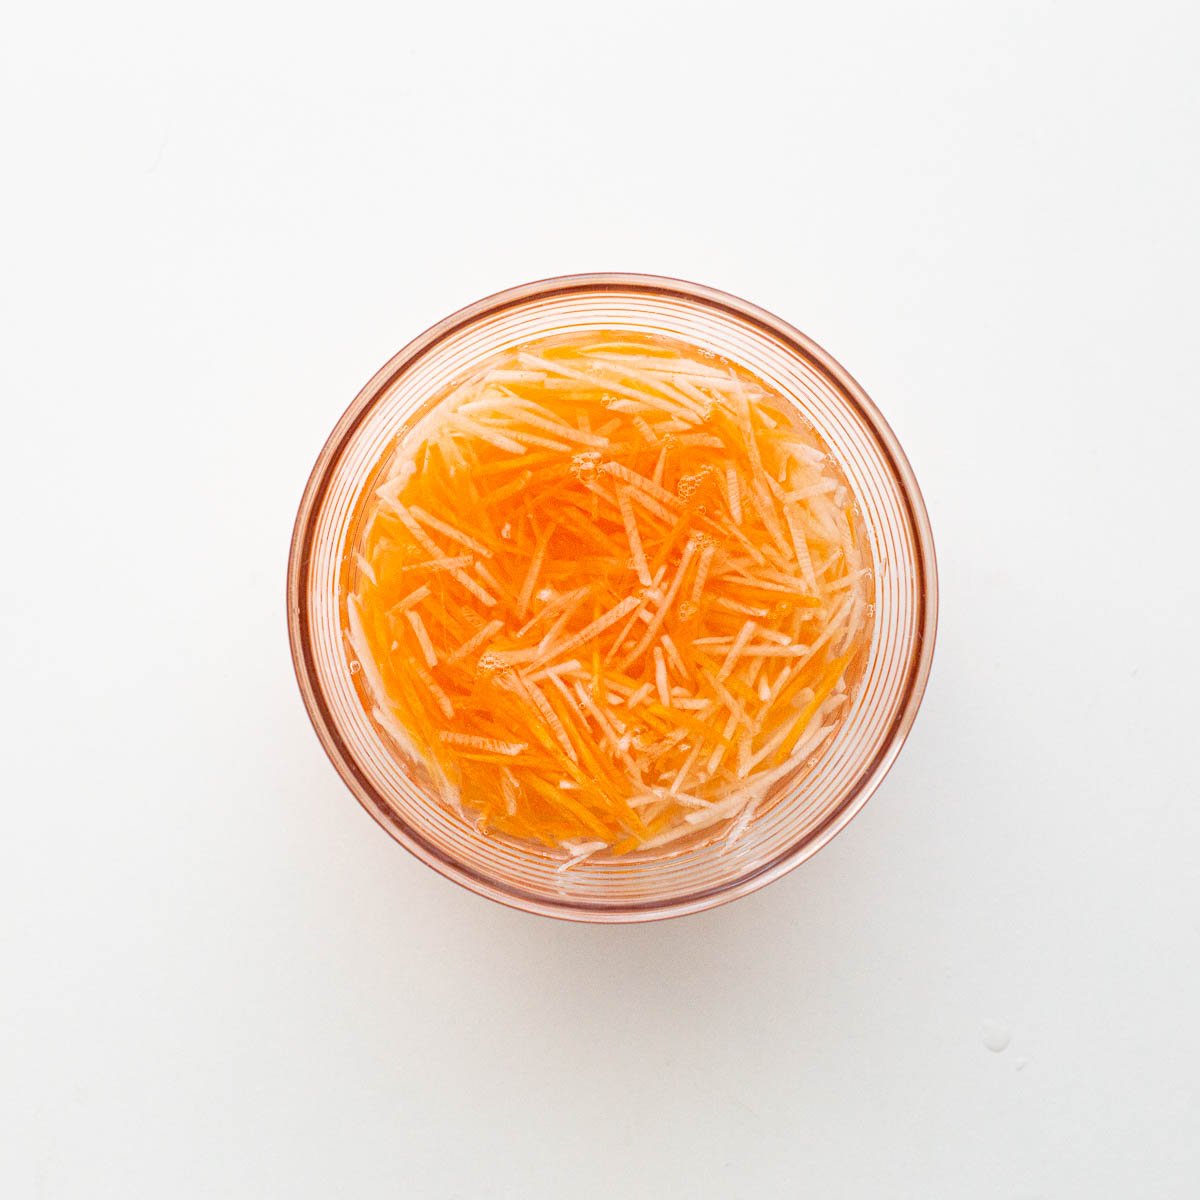 Soaking carrot and daikon in salt solution in a glass bowl.